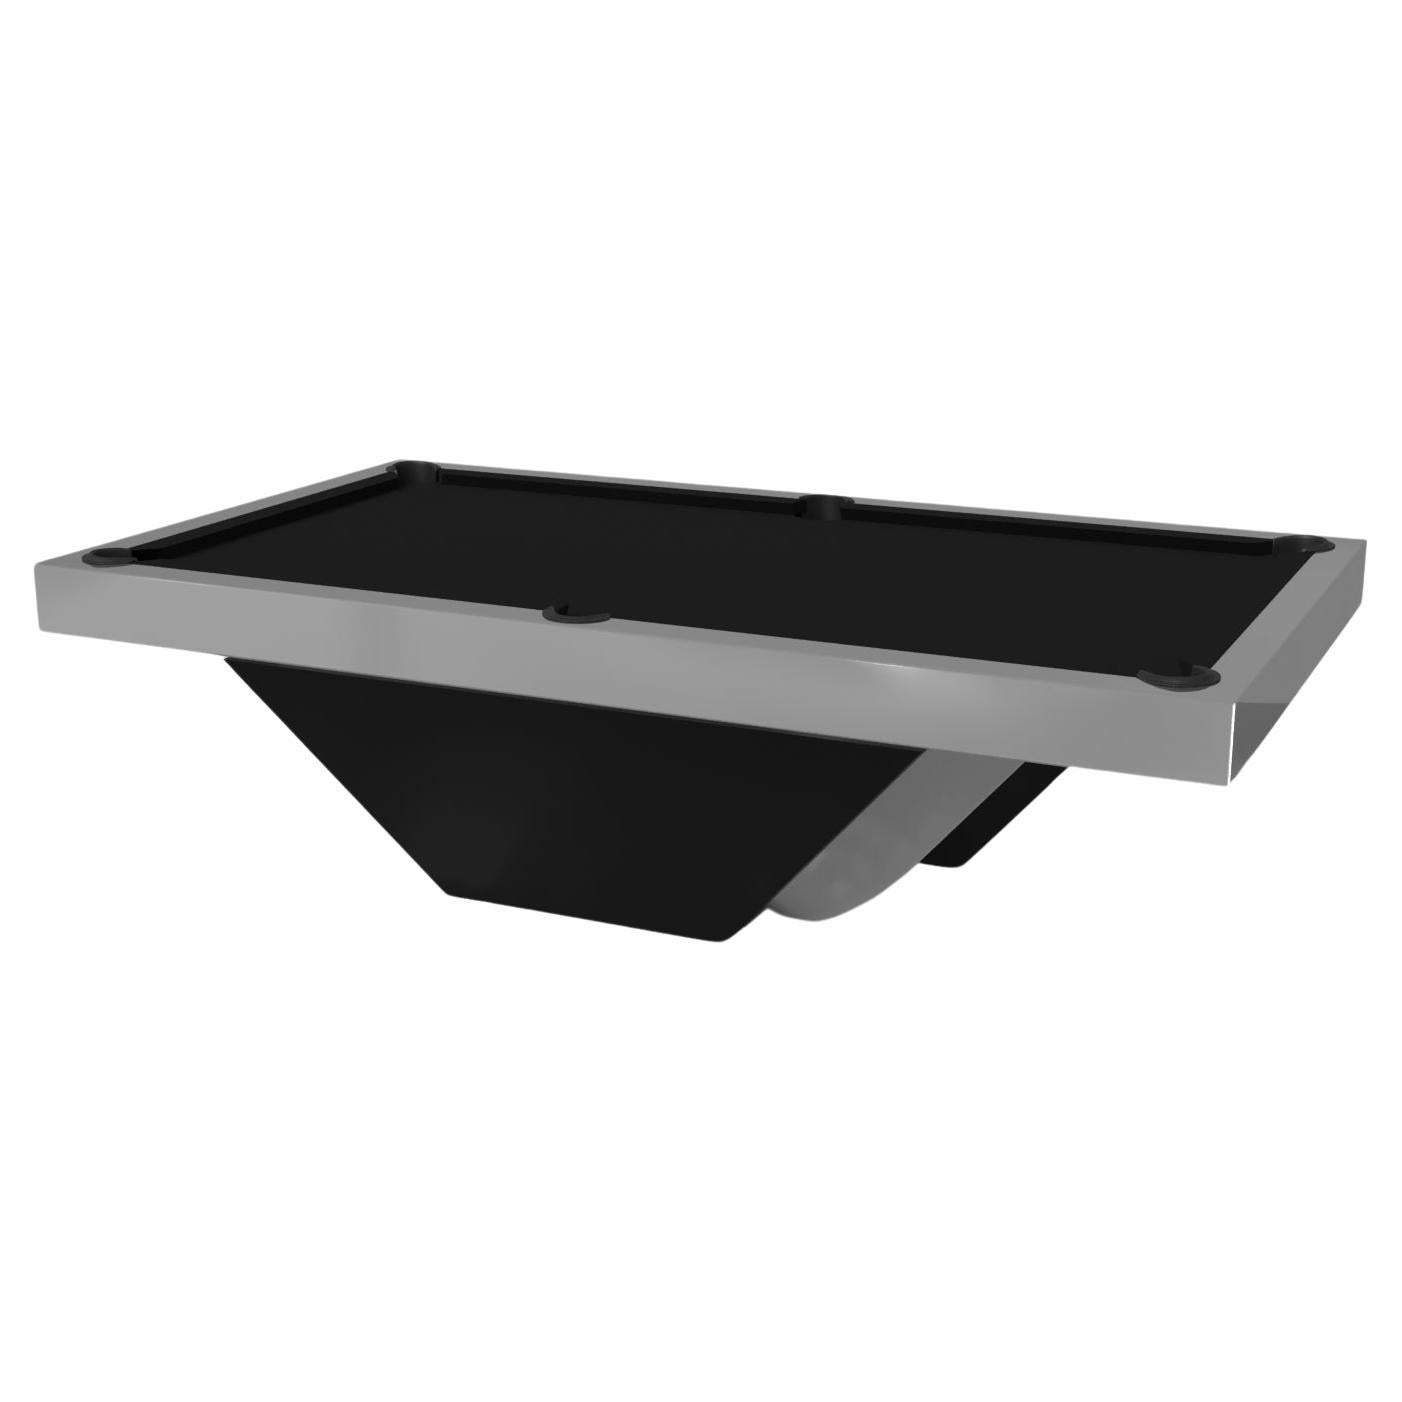 Elevate Customs Vogue Pool Table / Solid Stainless Steel in 7'/8' - Made in USA